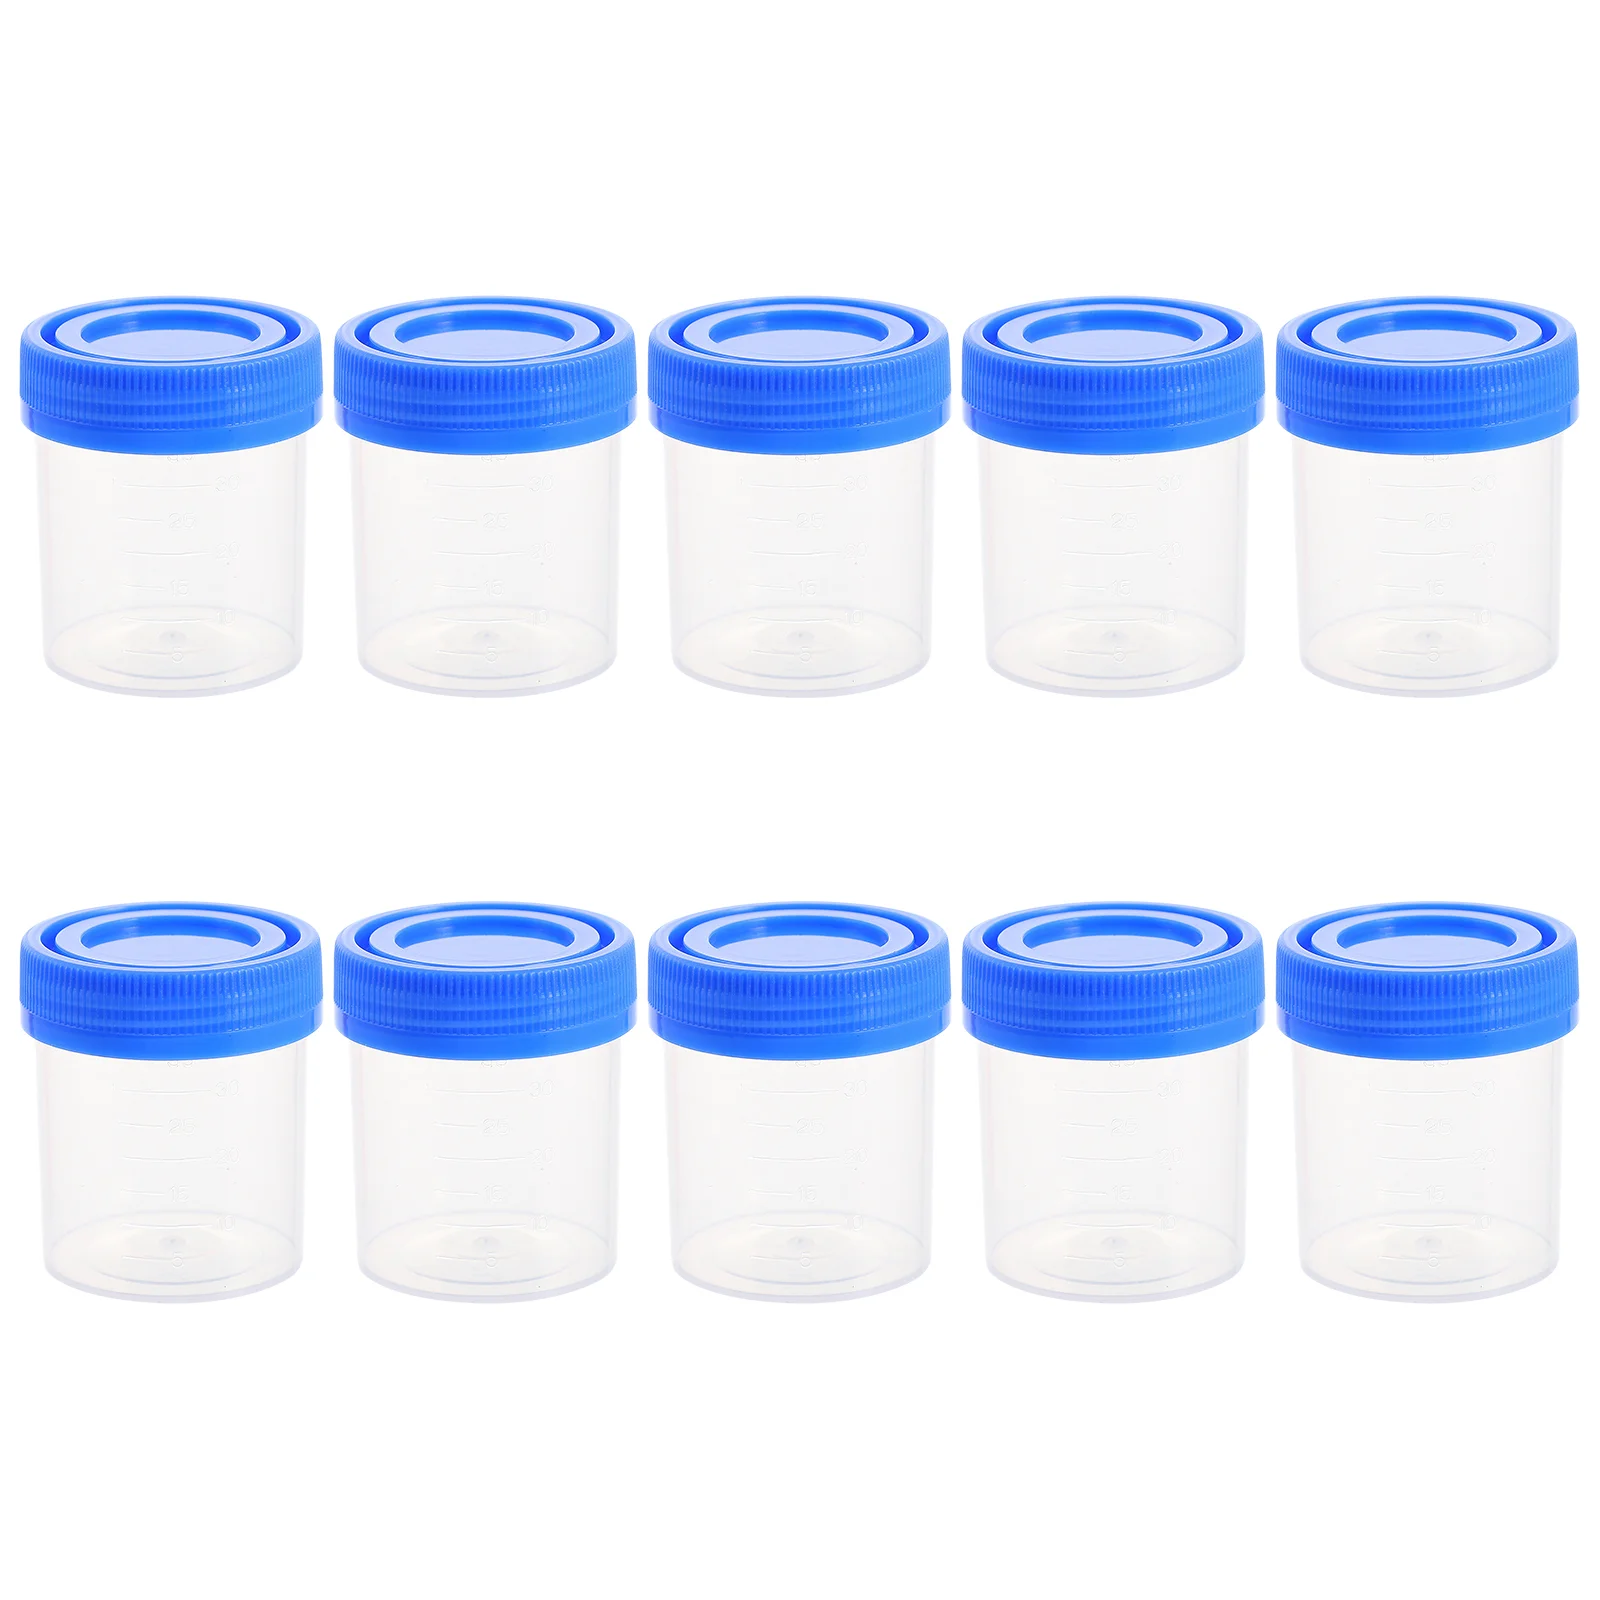 

Urine Cup Cups Sample Specimen Container Sterile Lids Measuring Pee Test Containers Scale Plastic Disposable Ovulation Pregnancy